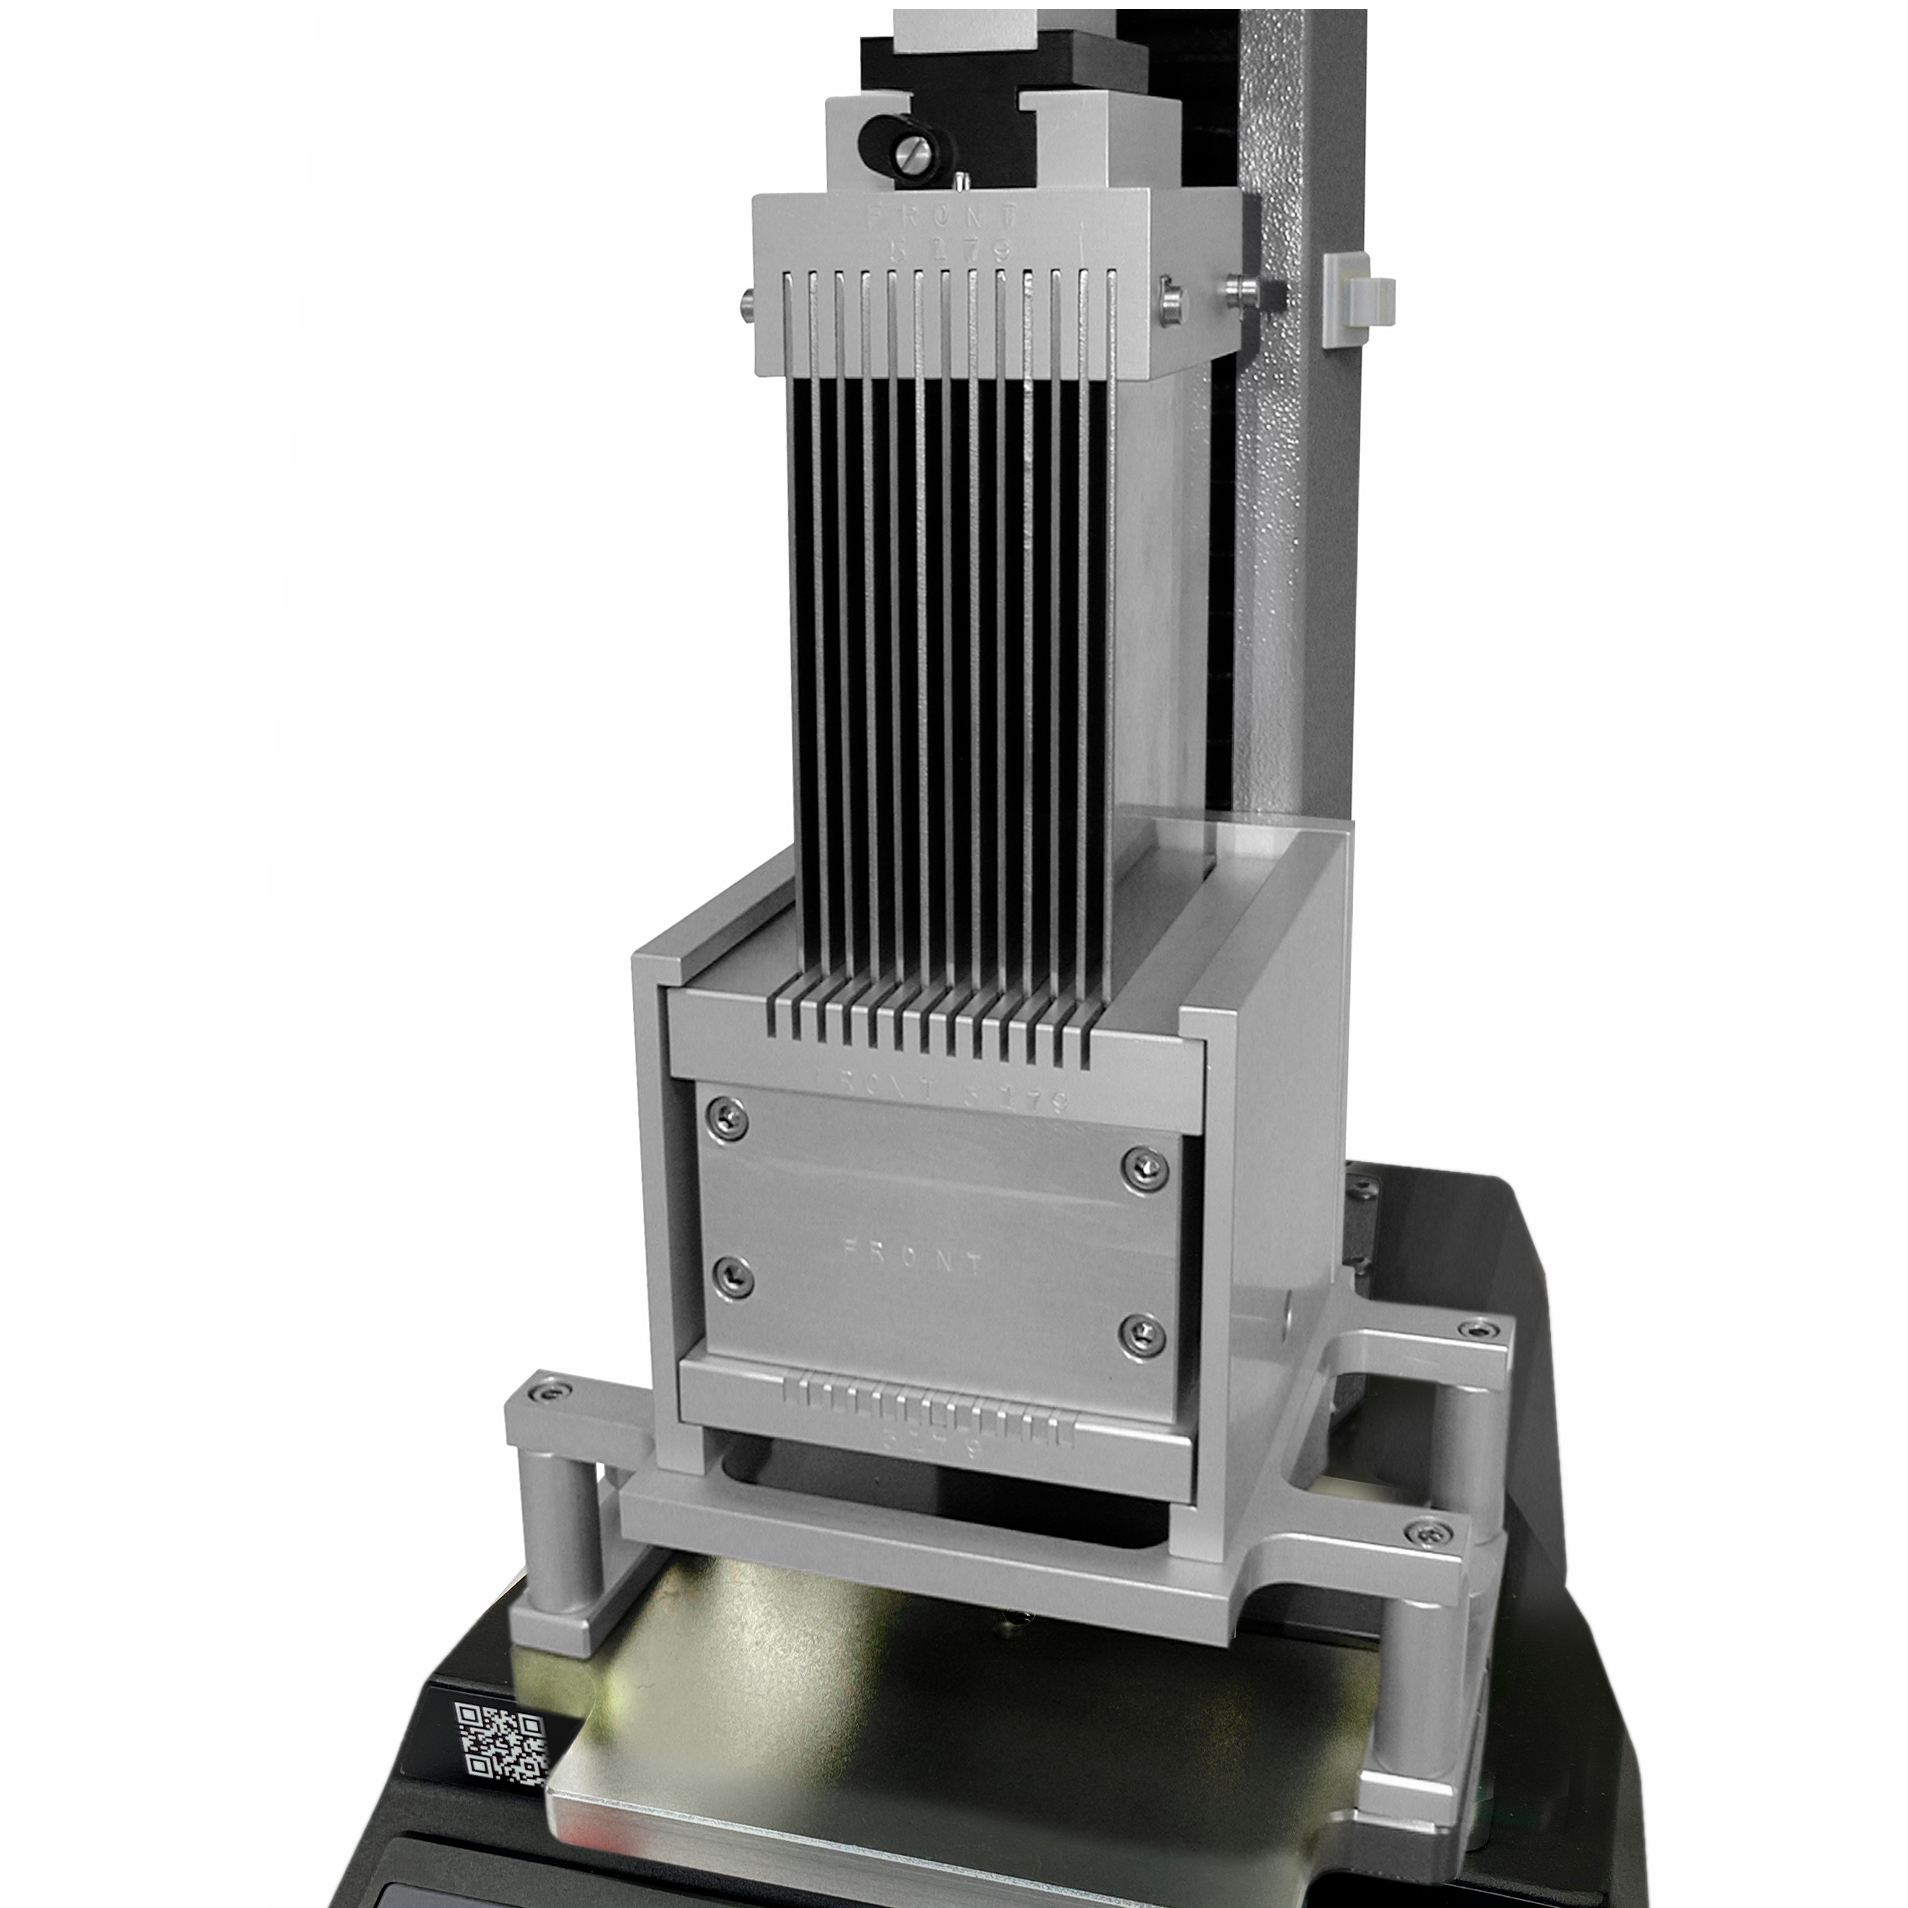 Kramer thin-blade Shear Cell fitted to the interchangeable fixture base plate